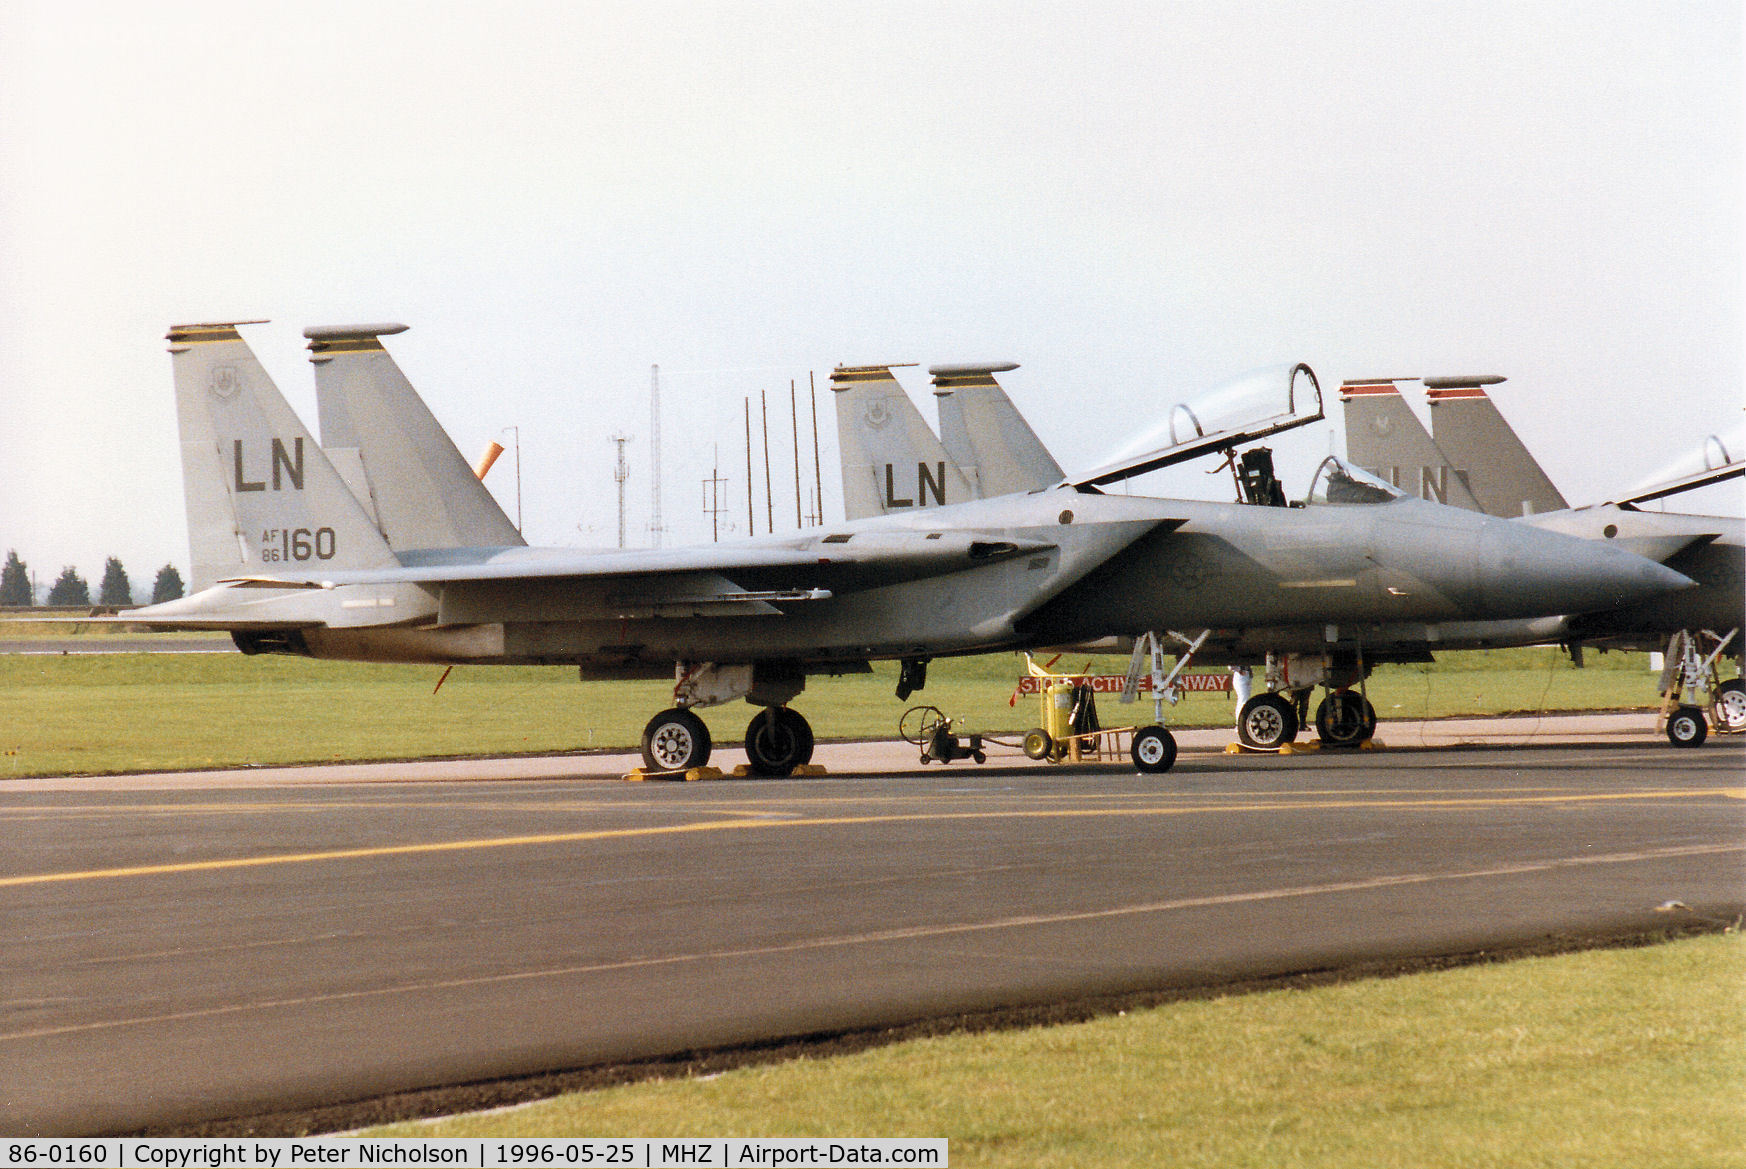 86-0160, 1986 McDonnell Douglas F-15C Eagle C/N 1007/C388, F-15C Eagle of 493rd Fighter Squadron/48th Fighter Wing at RAF Lakenheath on the flight-line at the 1996 RAF Mildenhall Air Fete.